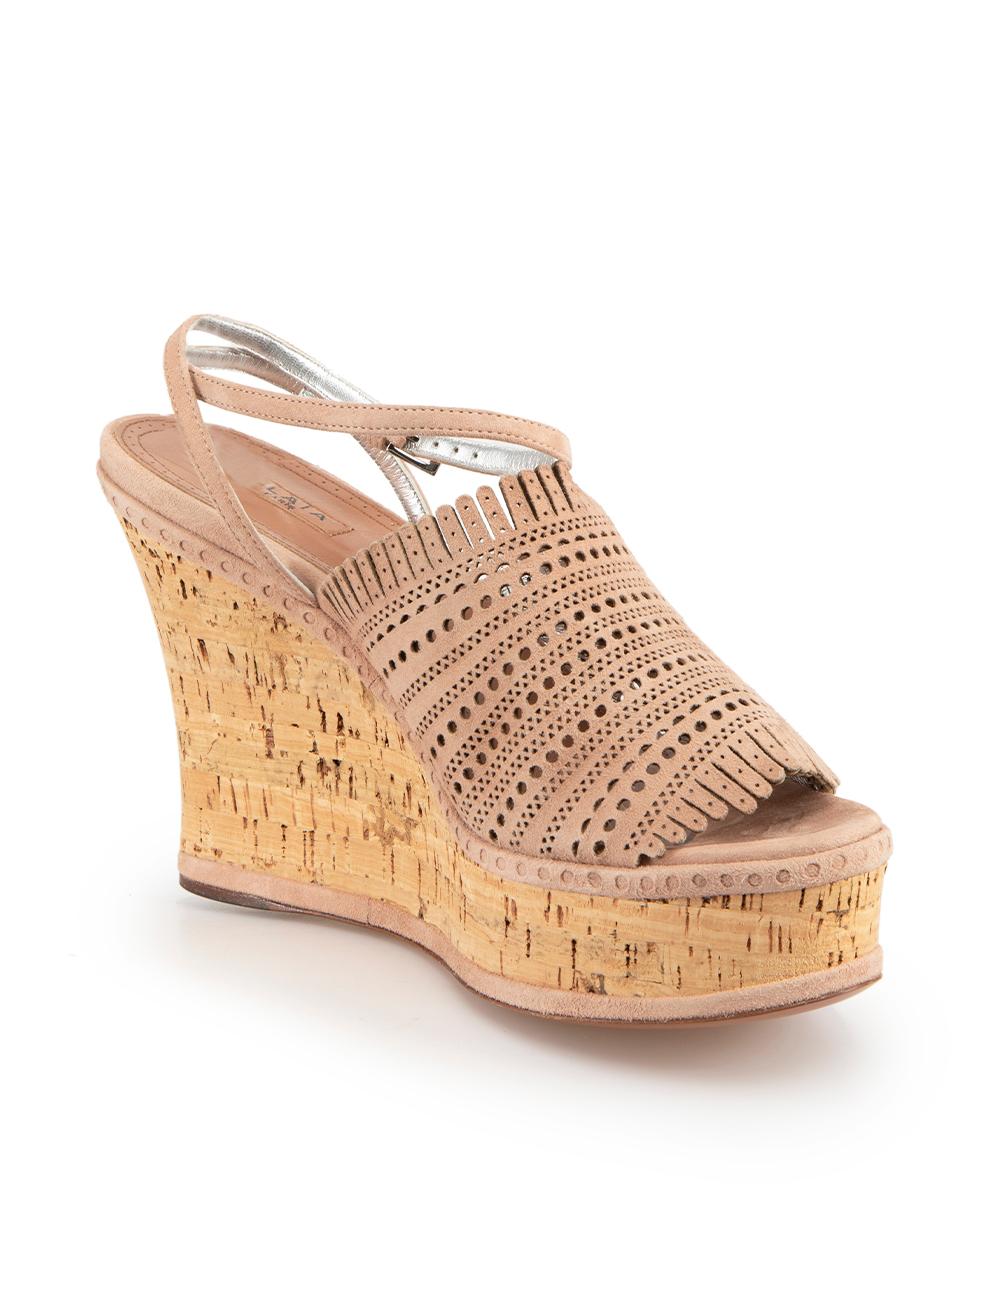 CONDITION is Never worn. No visible wear to wedges is evident on this new Alaïa designer resale item. Comes in original box with dust bag.
 
 Details
 Beige
 Suede
 Sandals
 Perforated accent
 Open toe
 Cork high wedge heel
 Ankle buckled strap